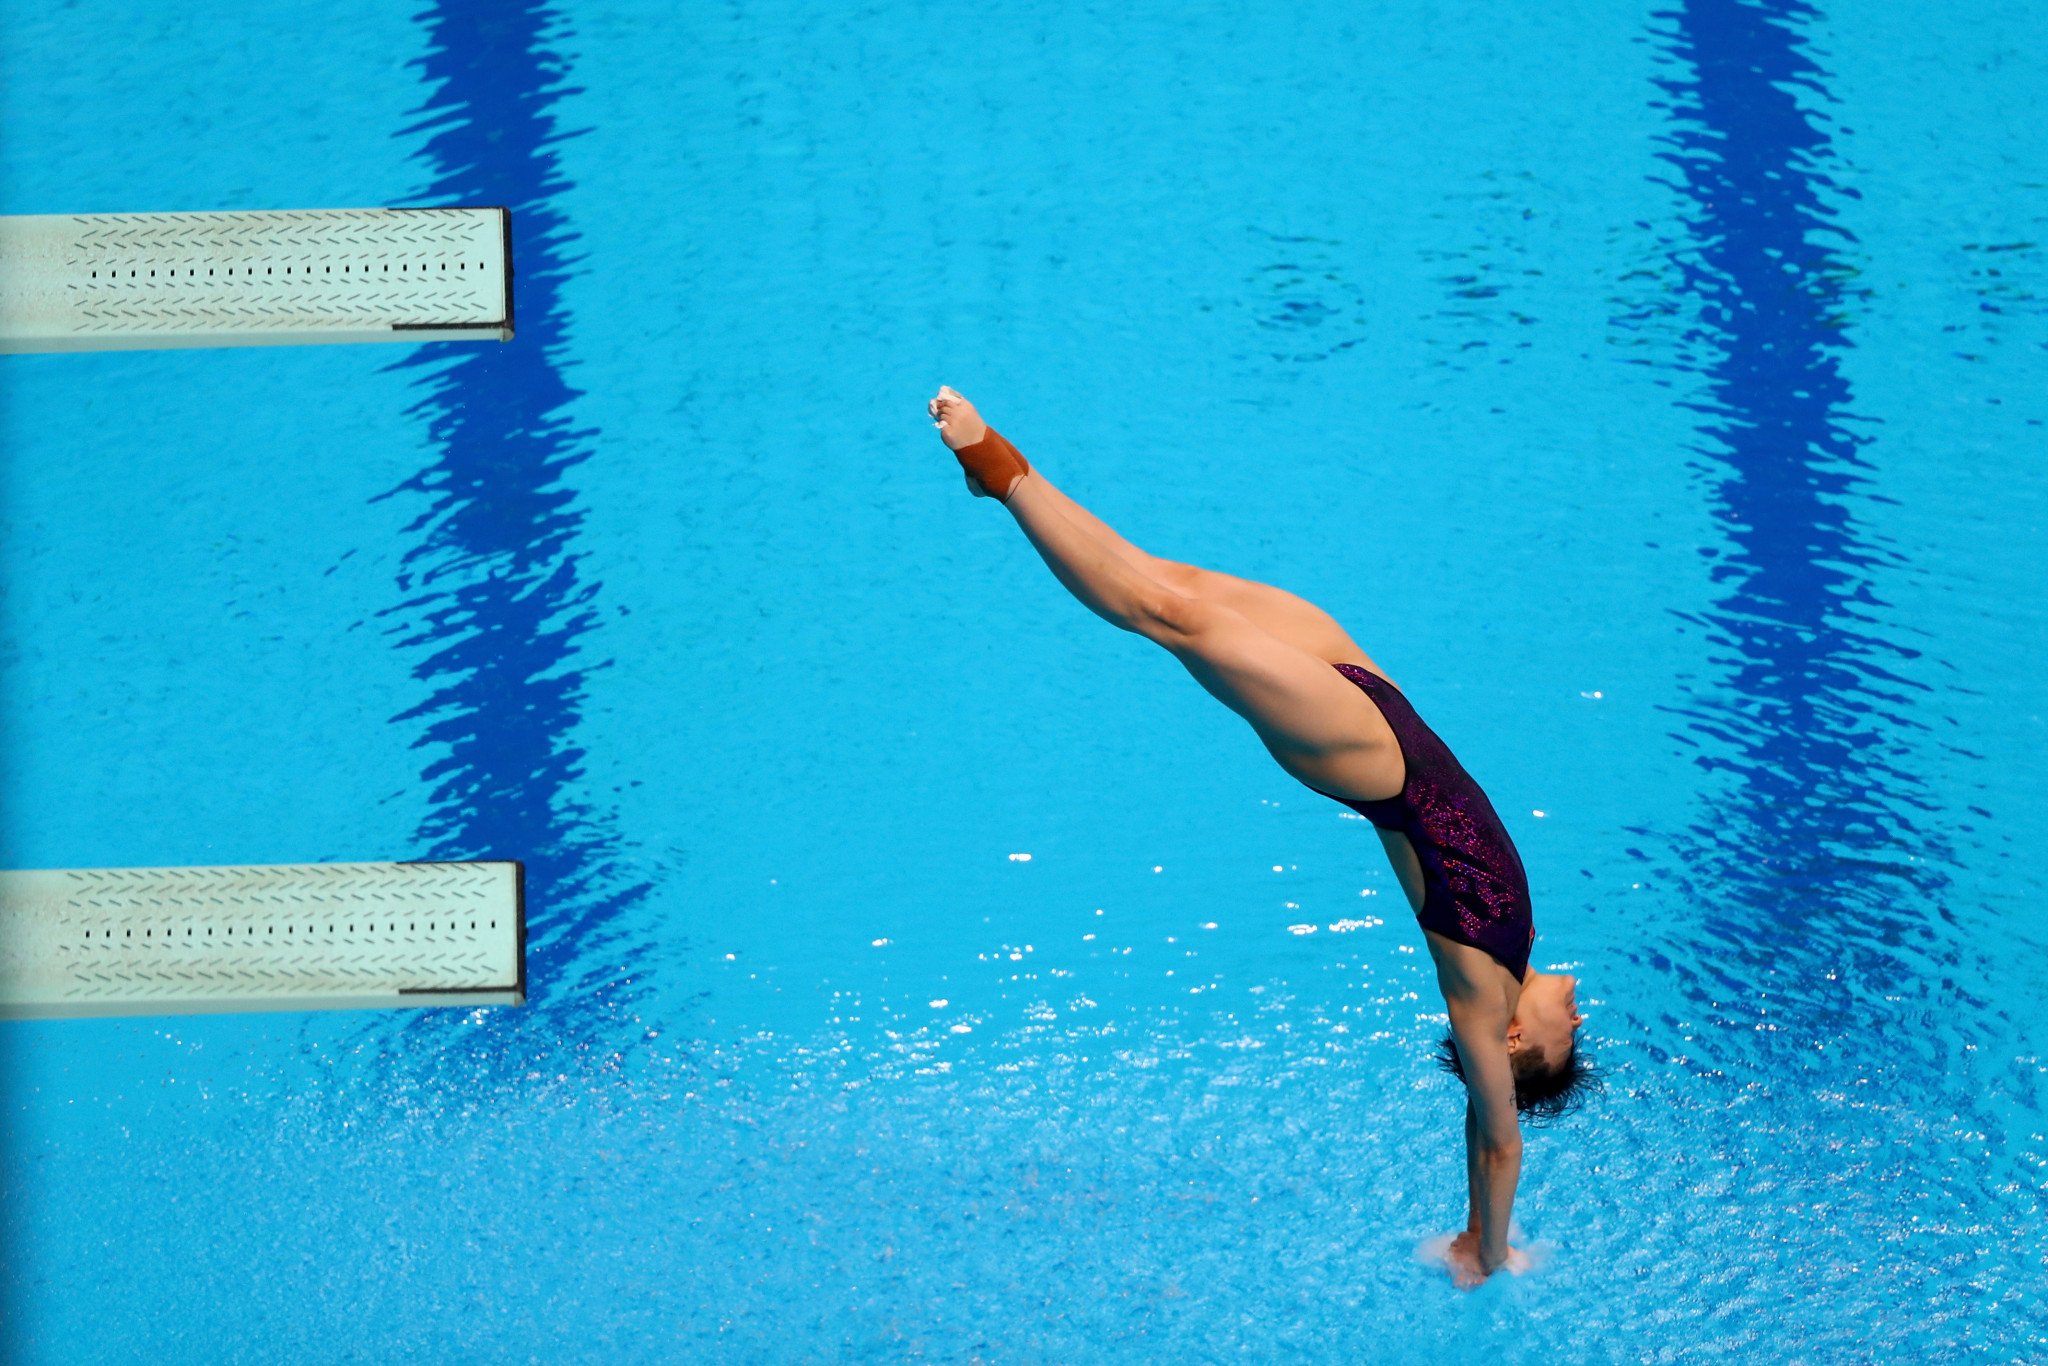 China's Shi Tingmao won the women's 3m springboard title today ©Getty Images